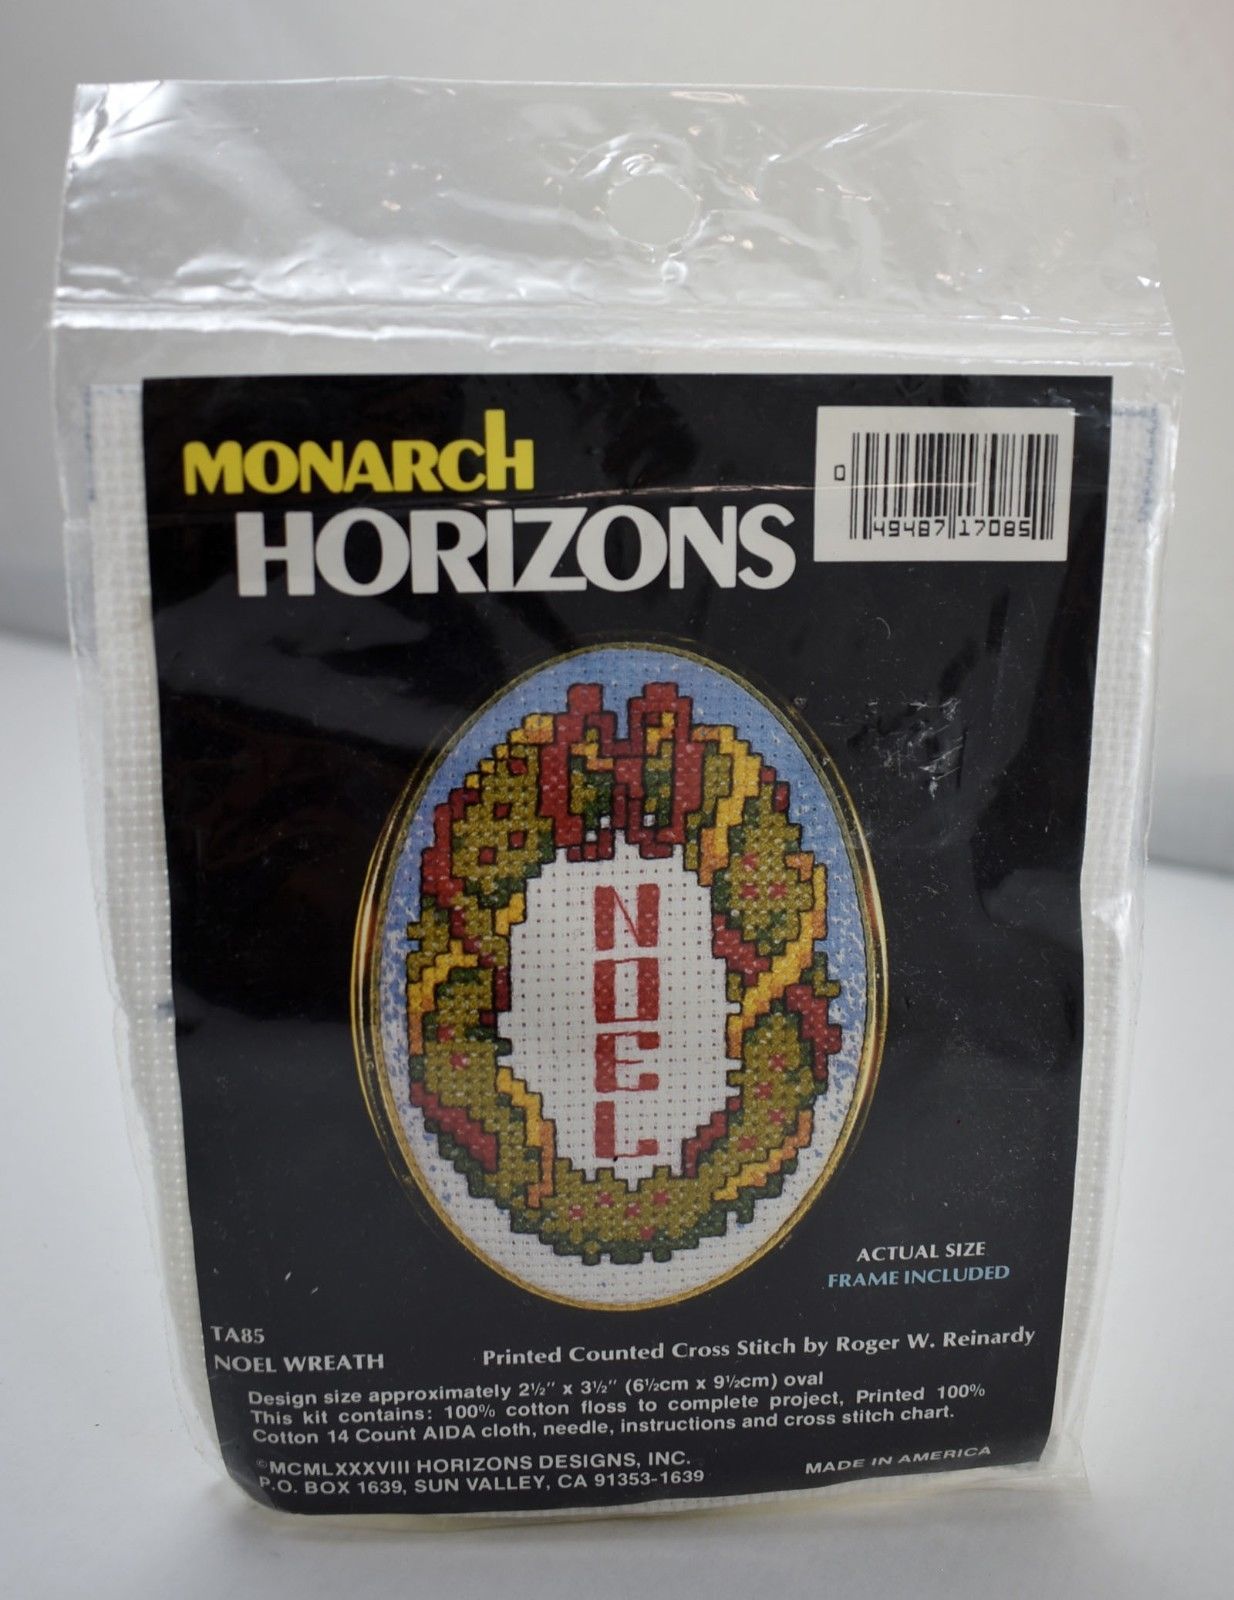 Noel Wreath Printed Counted Cross Stitch Kit by Monarch Horizons - with Frame - $6.60